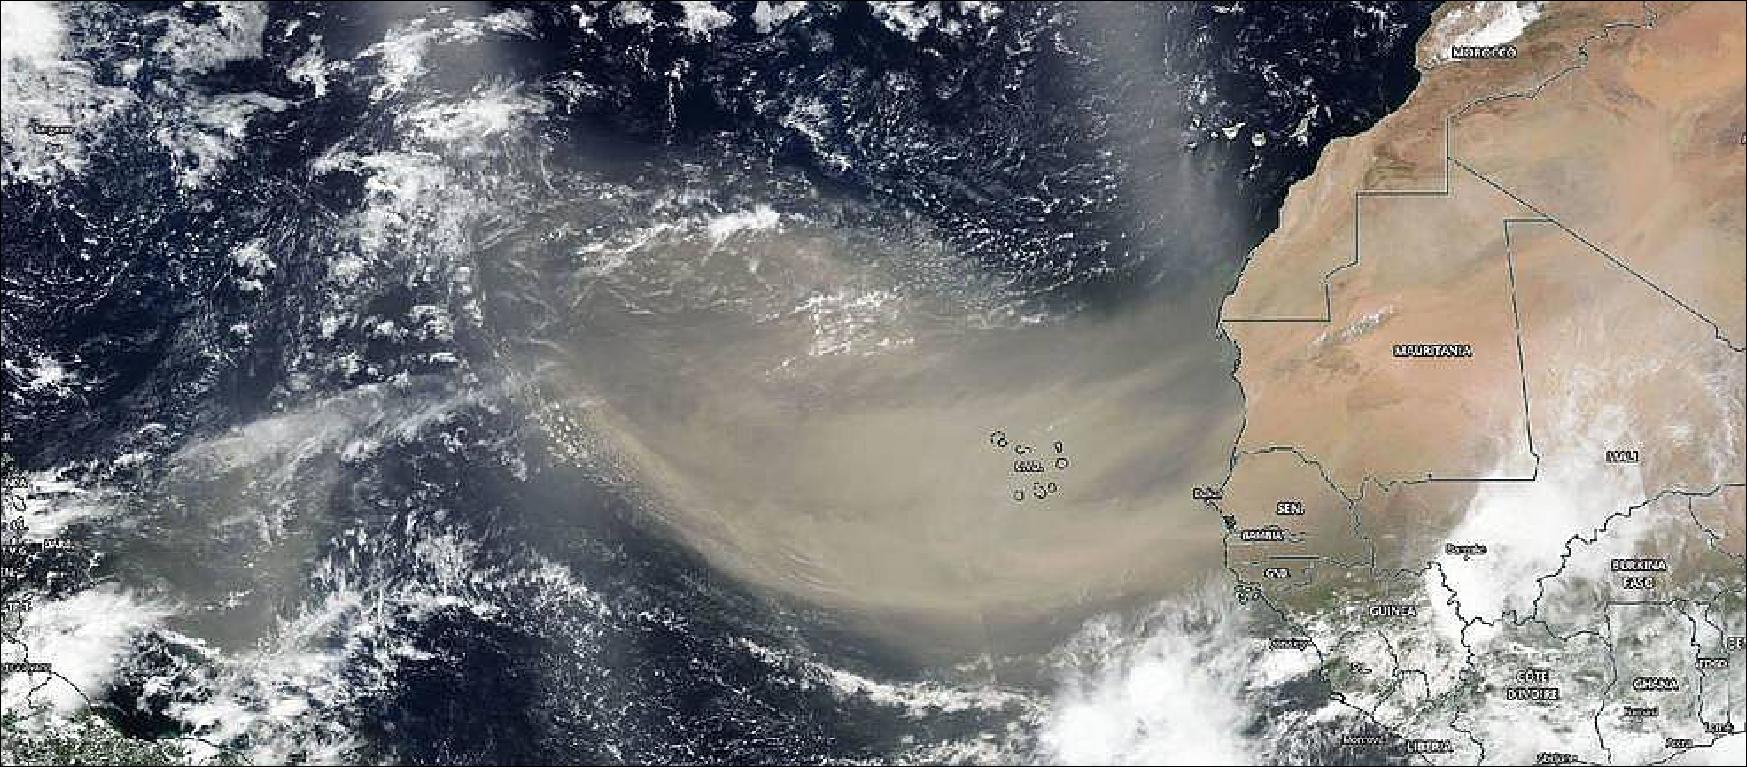 Figure 15: On June 18, 2020, NASA-NOAA’s Suomi NPP satellite captured this visible image of the large light brown plume of Saharan dust over the North Atlantic Ocean. The image showed that the dust from Africa’s west coast extended almost to the Lesser Antilles in the western North Atlantic Ocean (image credits: NASA Worldview)